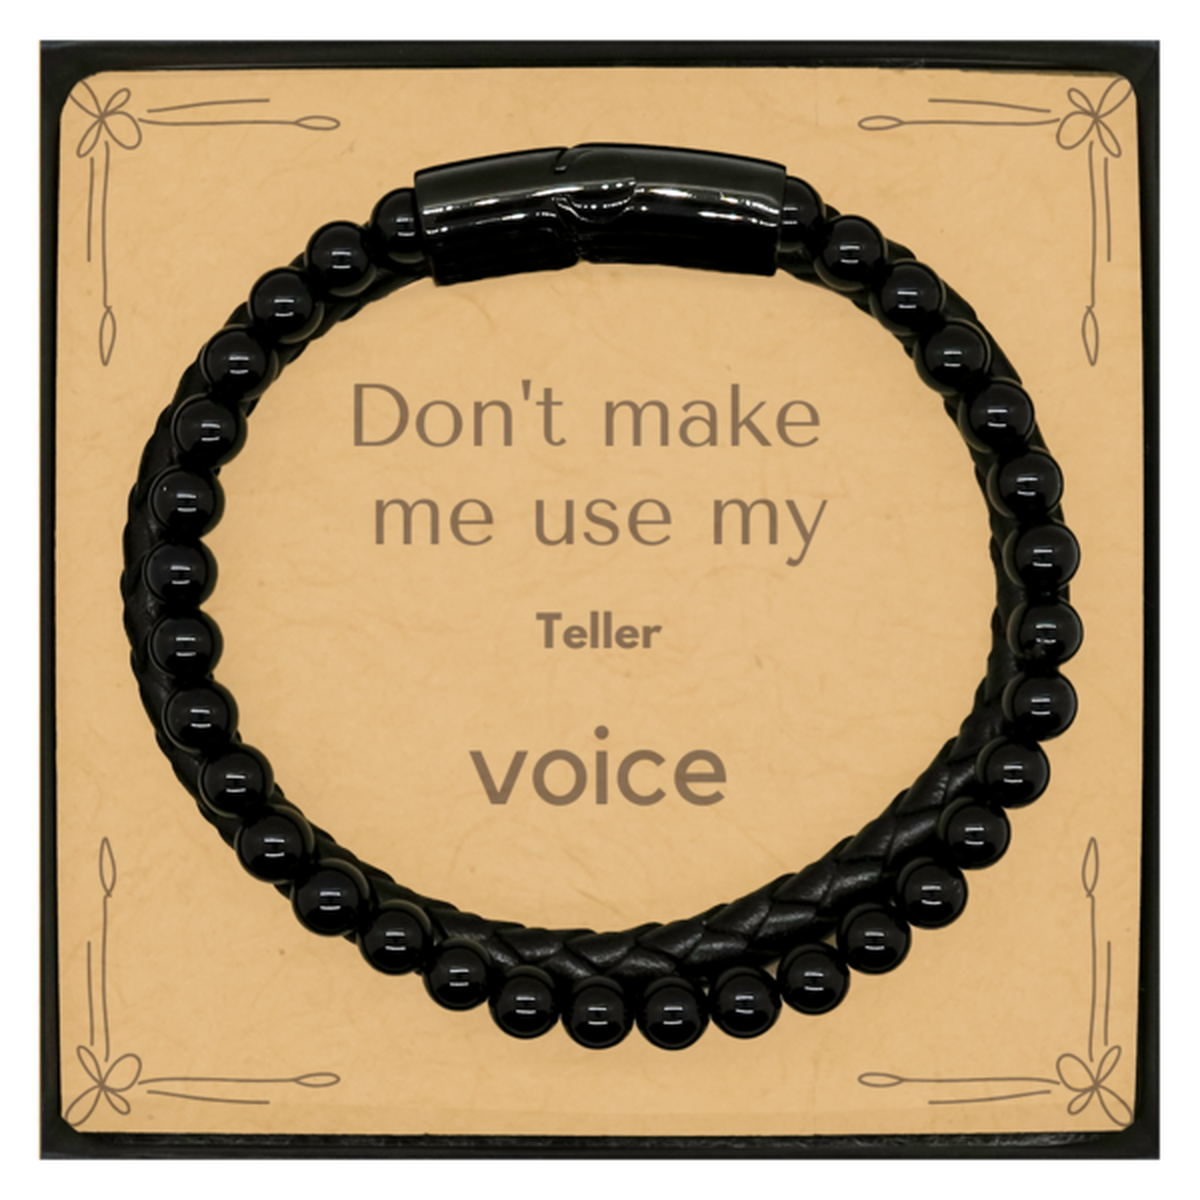 Don't make me use my Teller voice, Sarcasm Teller Card Gifts, Christmas Teller Stone Leather Bracelets Birthday Unique Gifts For Teller Coworkers, Men, Women, Colleague, Friends